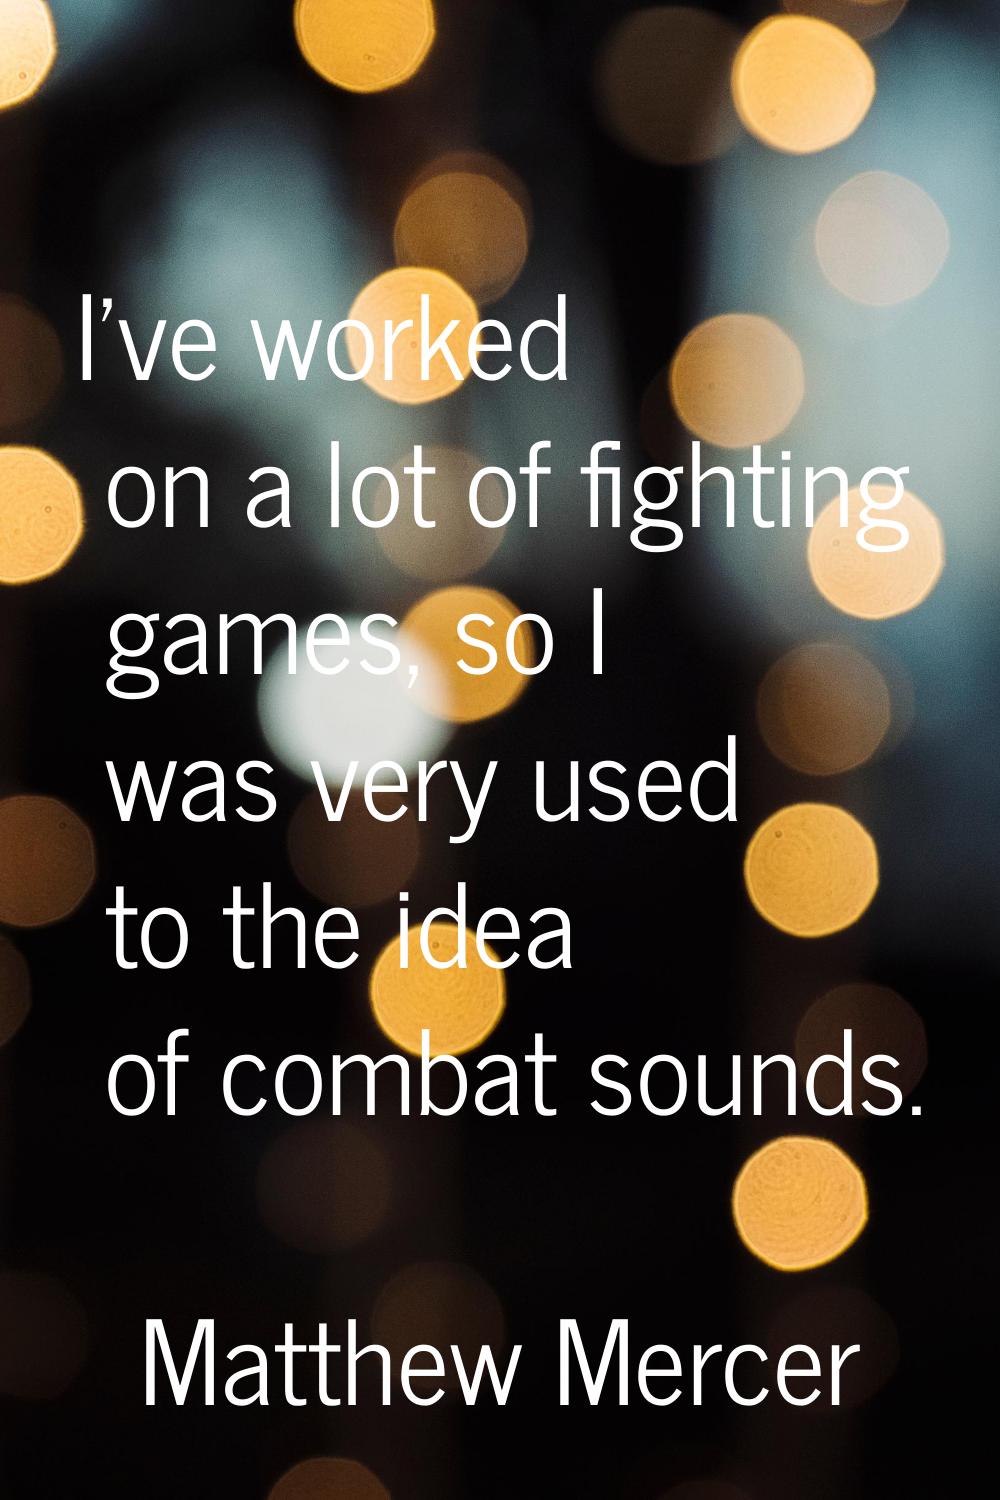 I've worked on a lot of fighting games, so I was very used to the idea of combat sounds.